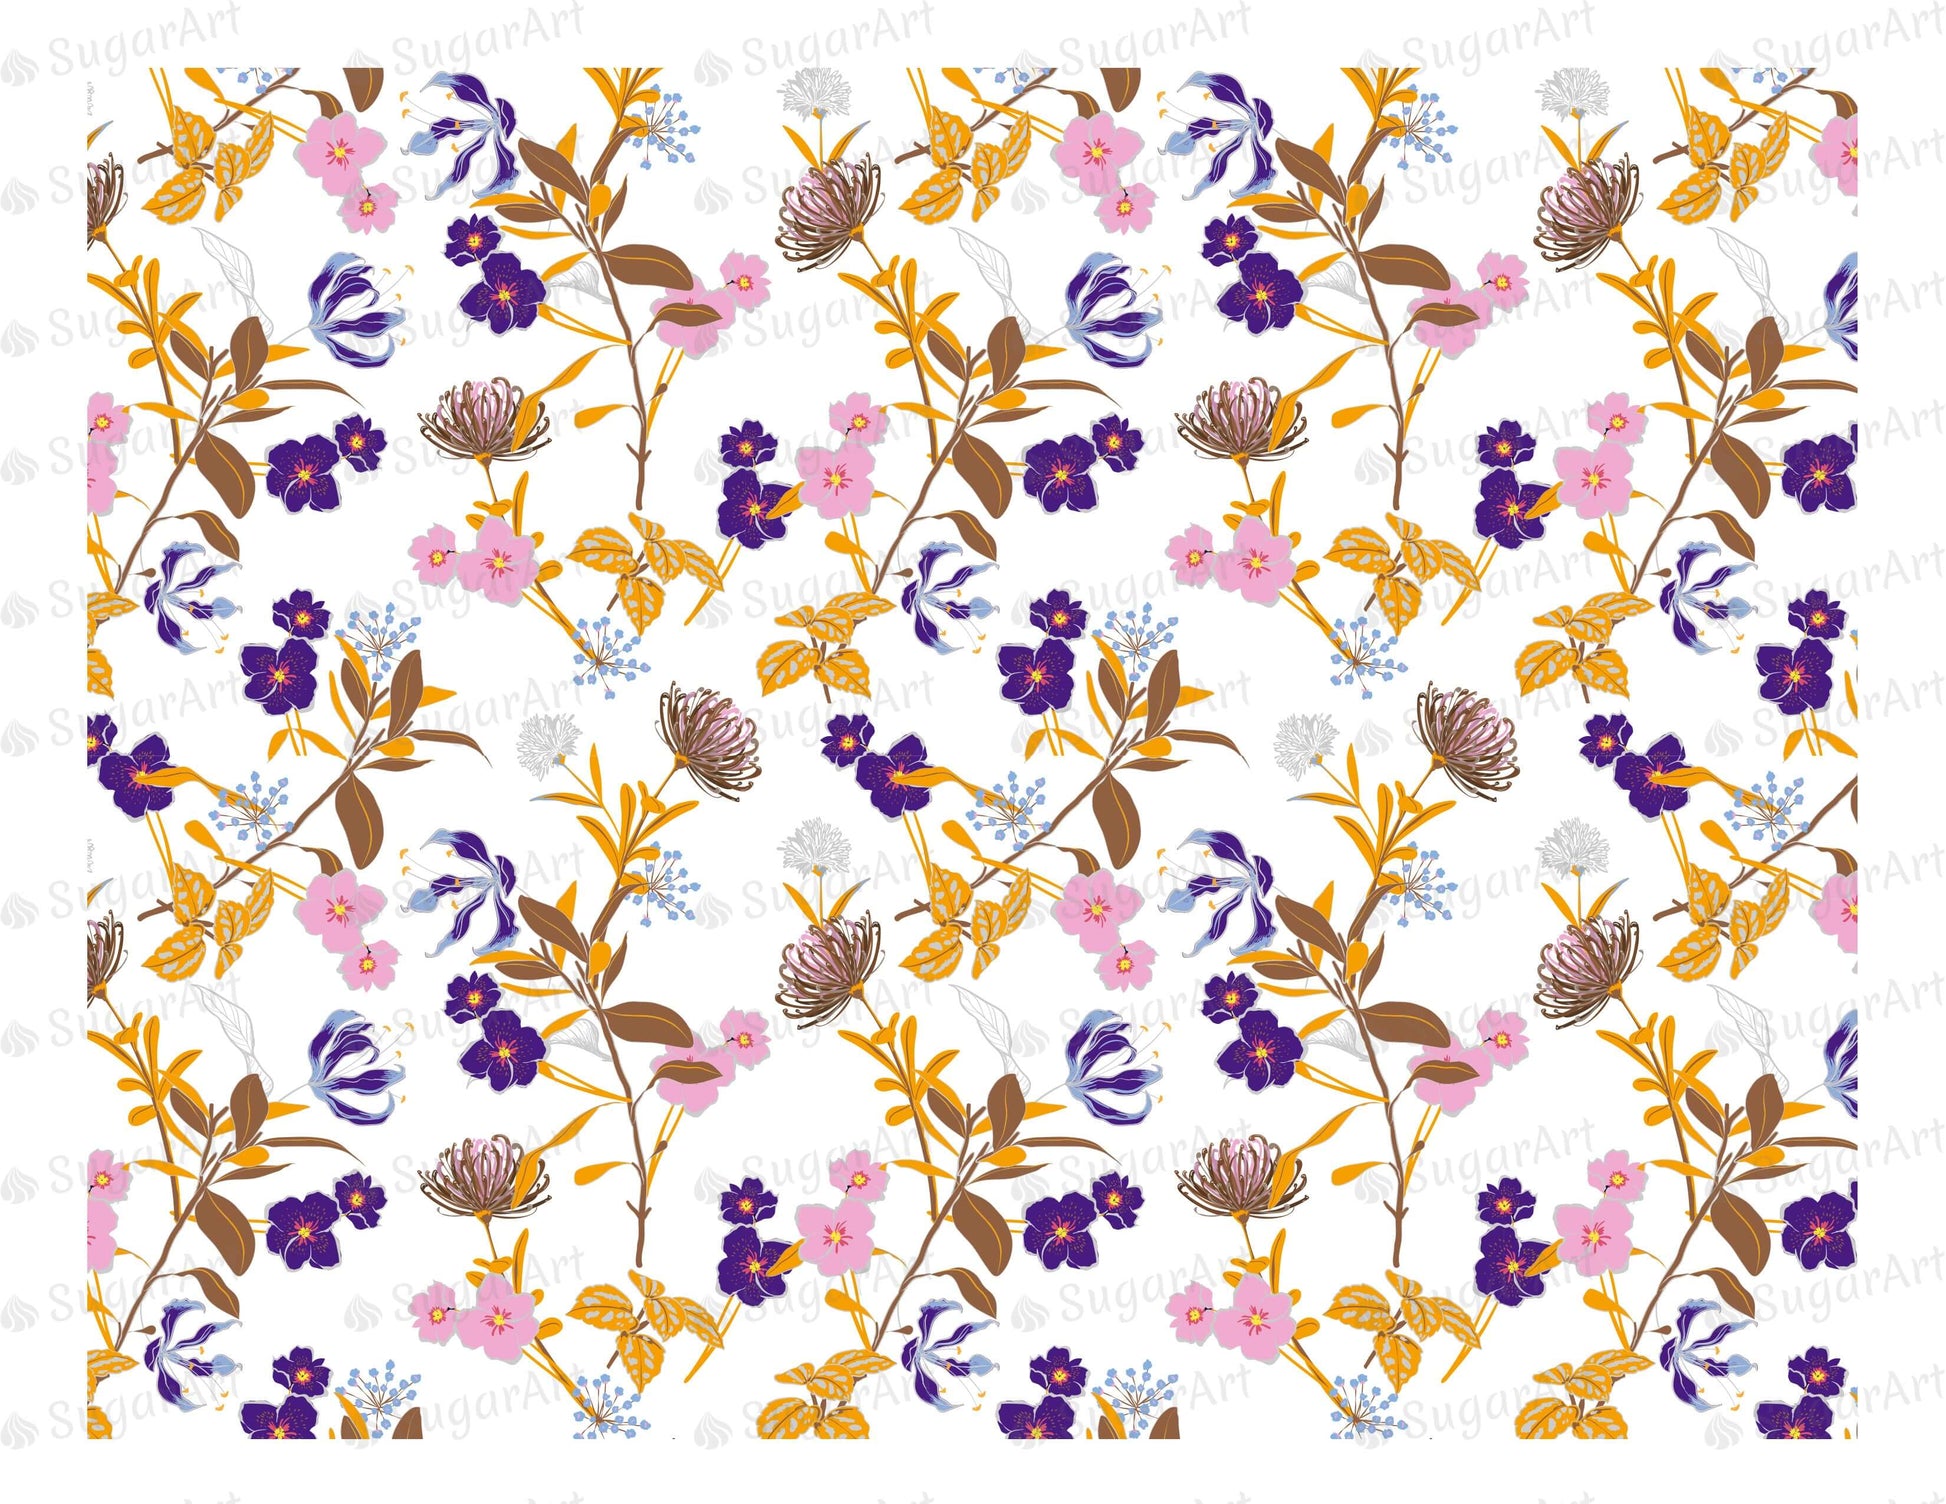 Blooming Garden Floral Pattern - Icing - ISA022.